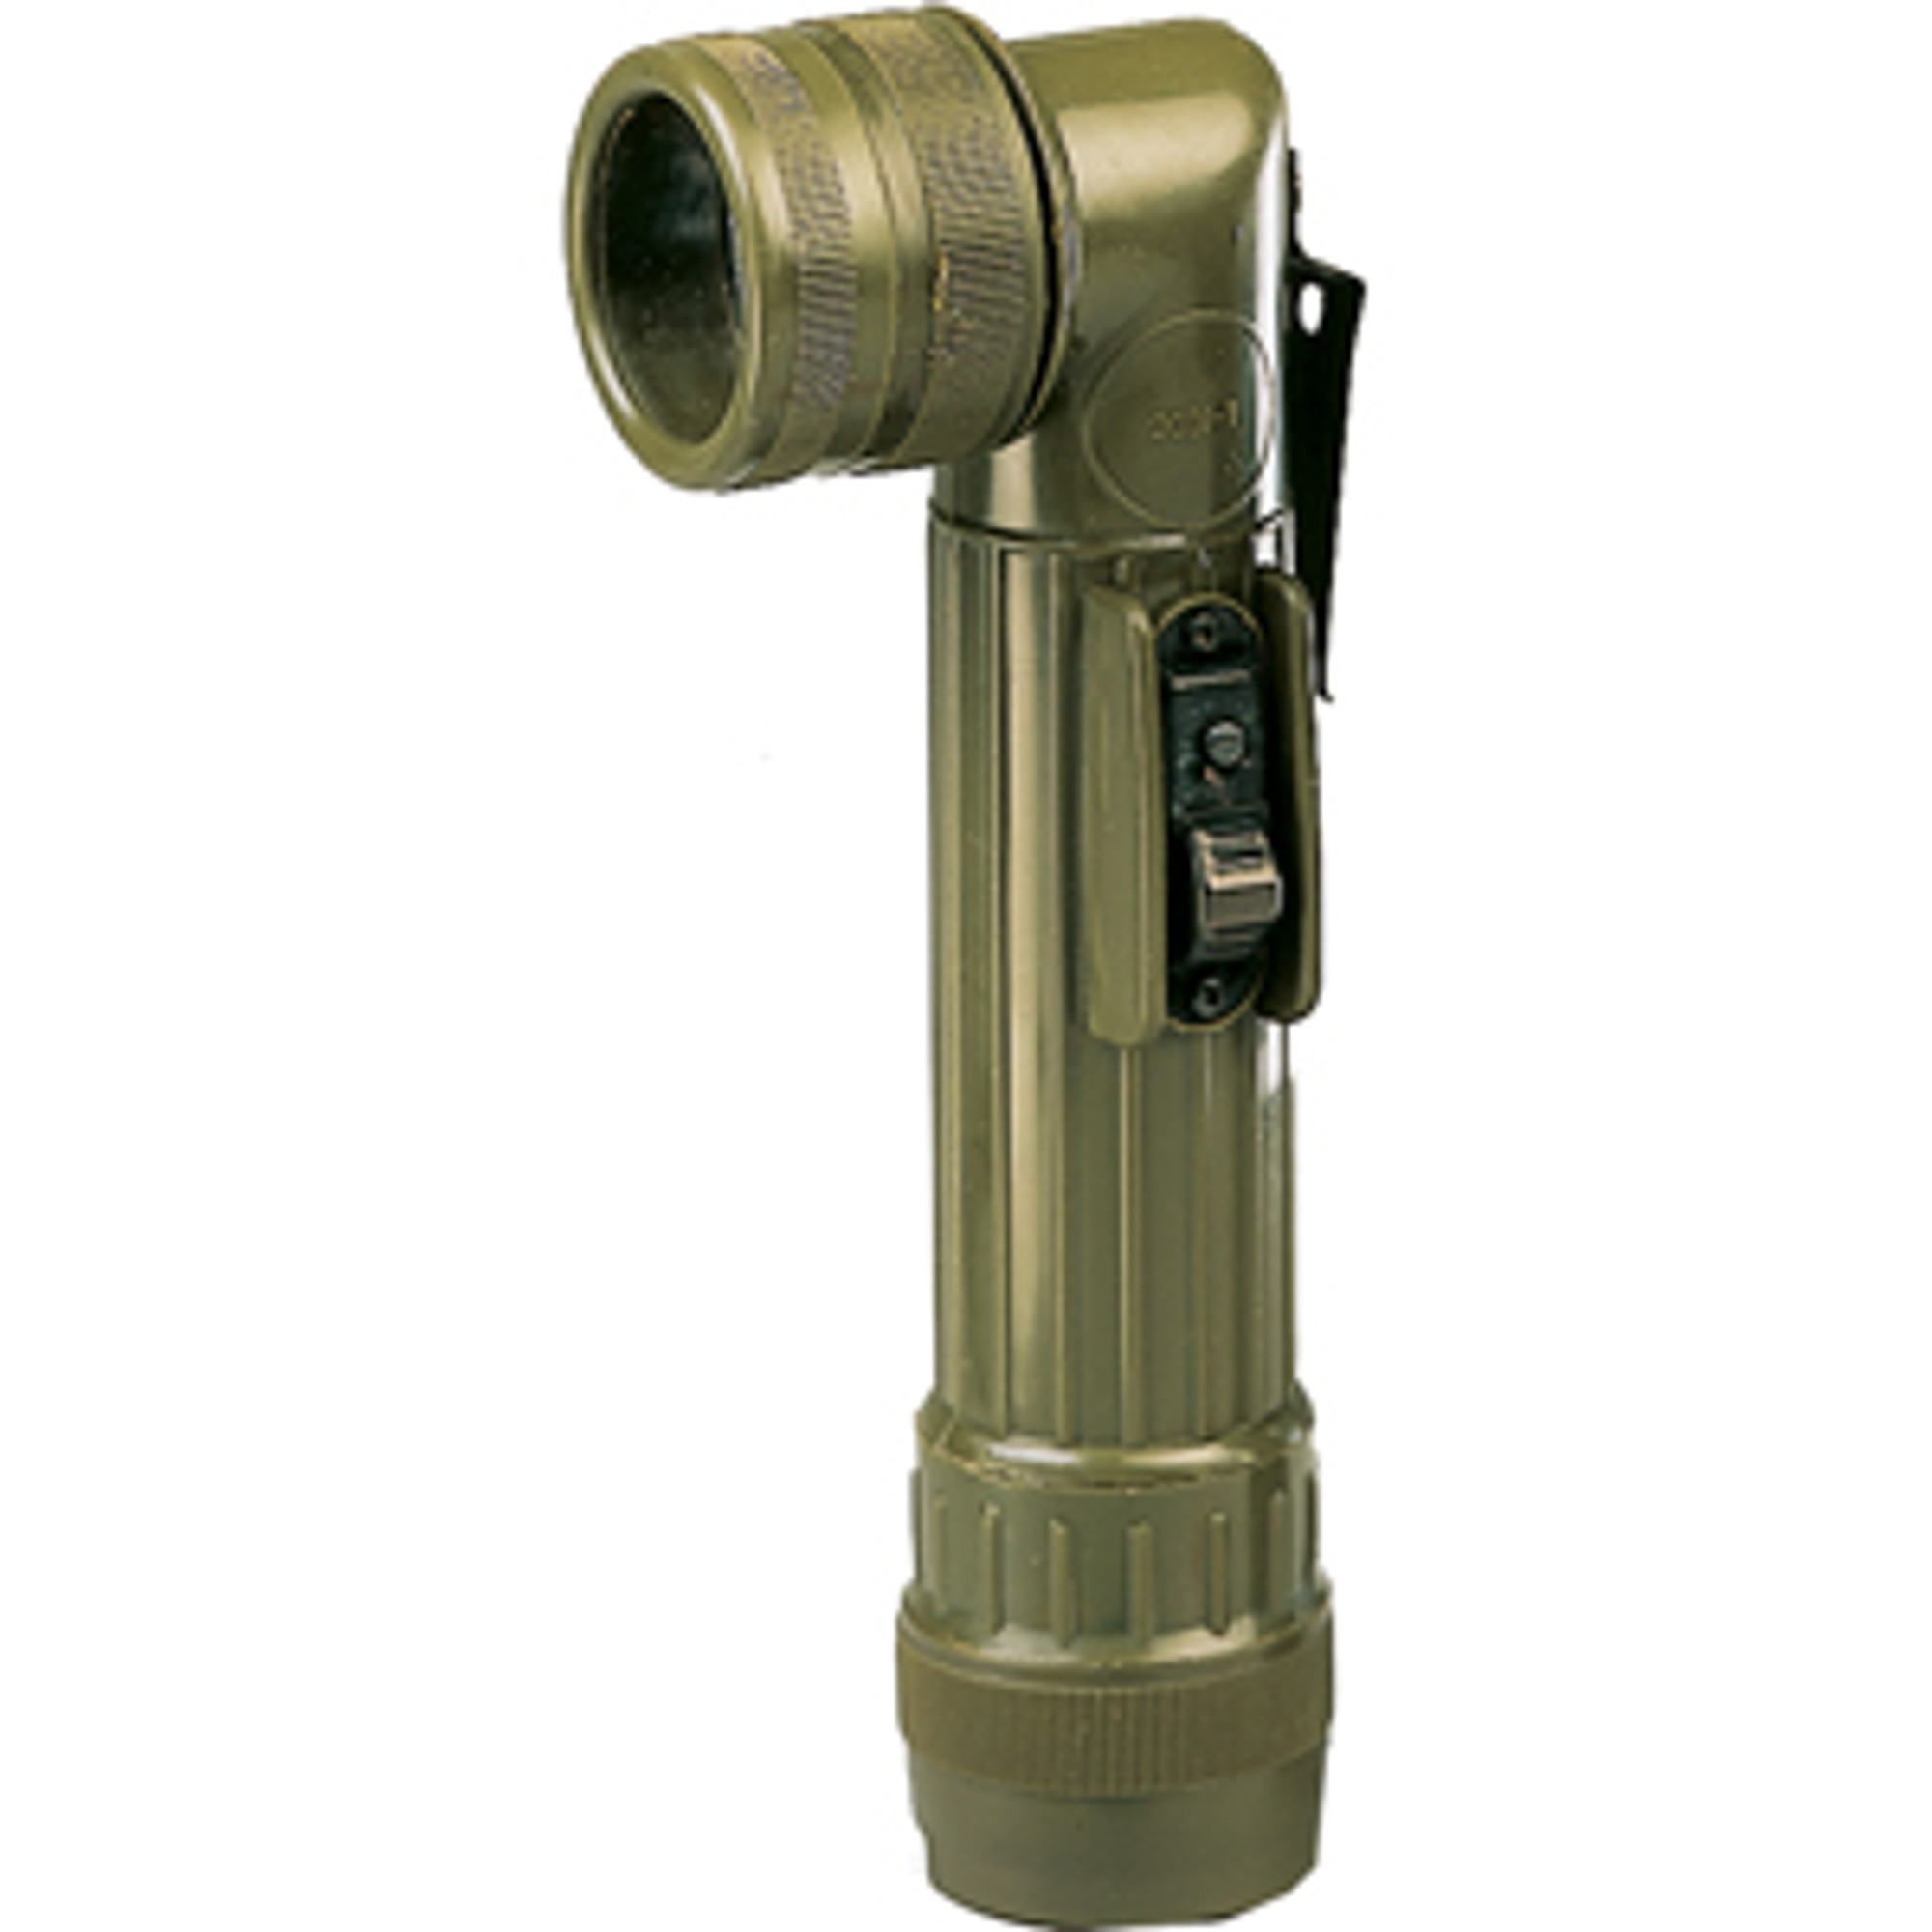 Rothco Army Style C-Cell Flashlight - Olive Drab